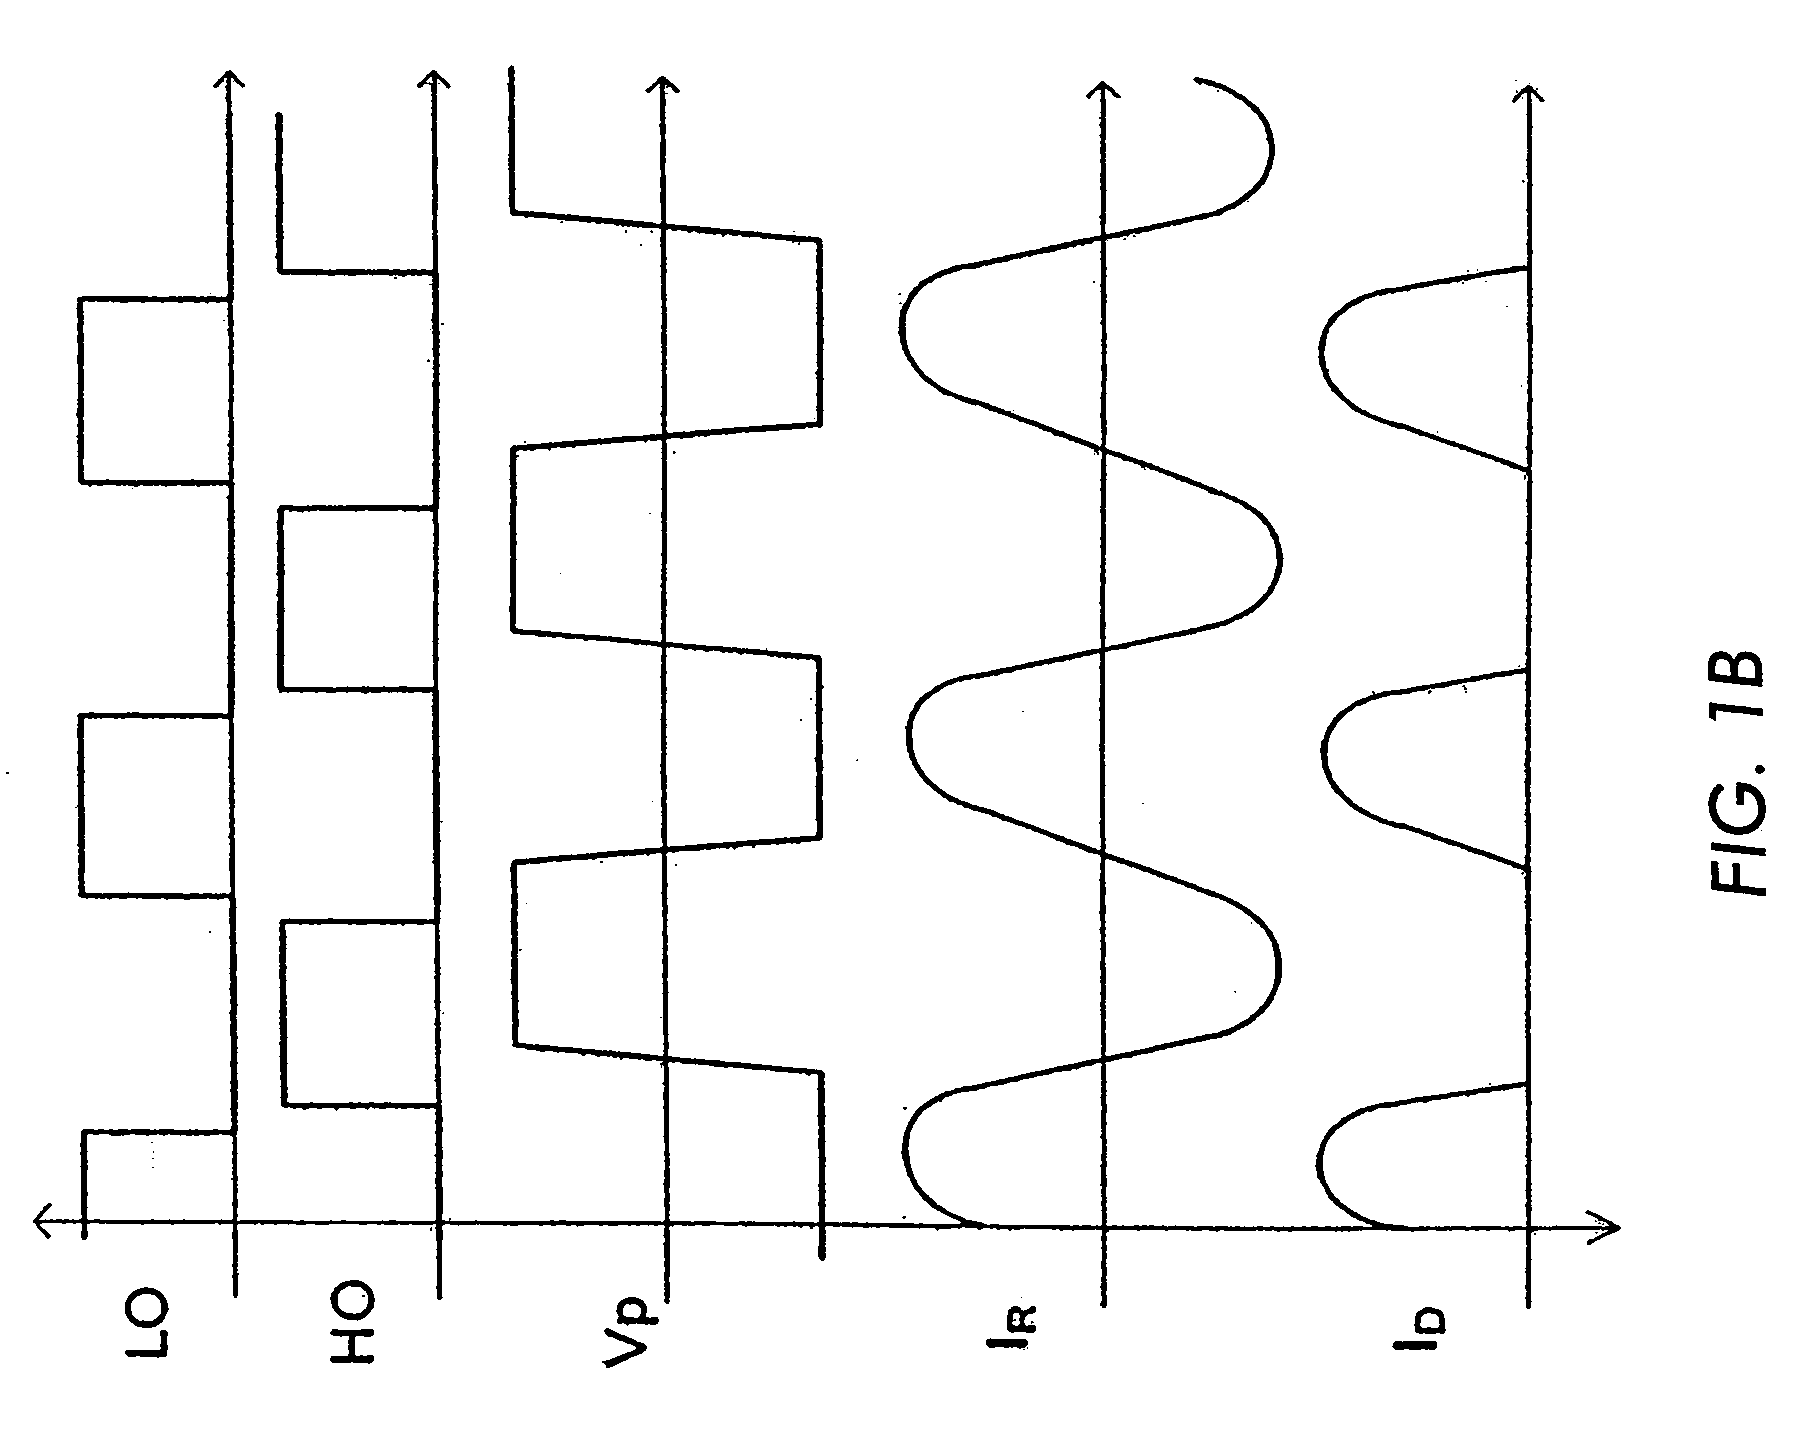 Secondary side synchronous rectifier for resonant converter